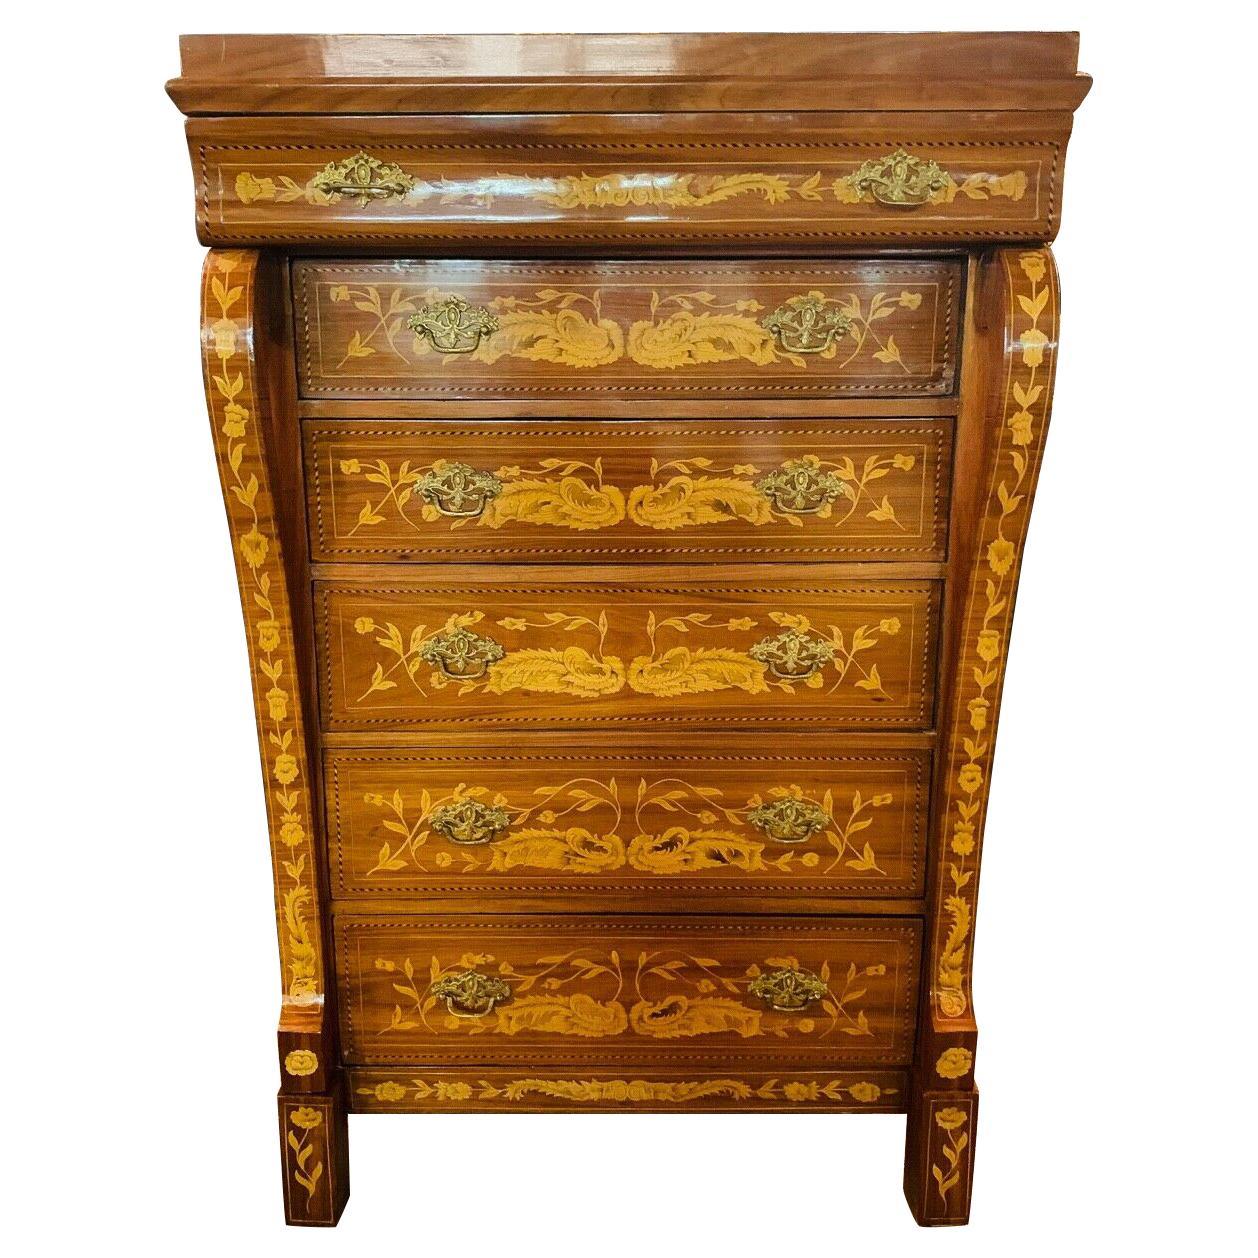 Chiffoniere / Chest of Drawers in the Dutch Baroque Style with Floral Inlays